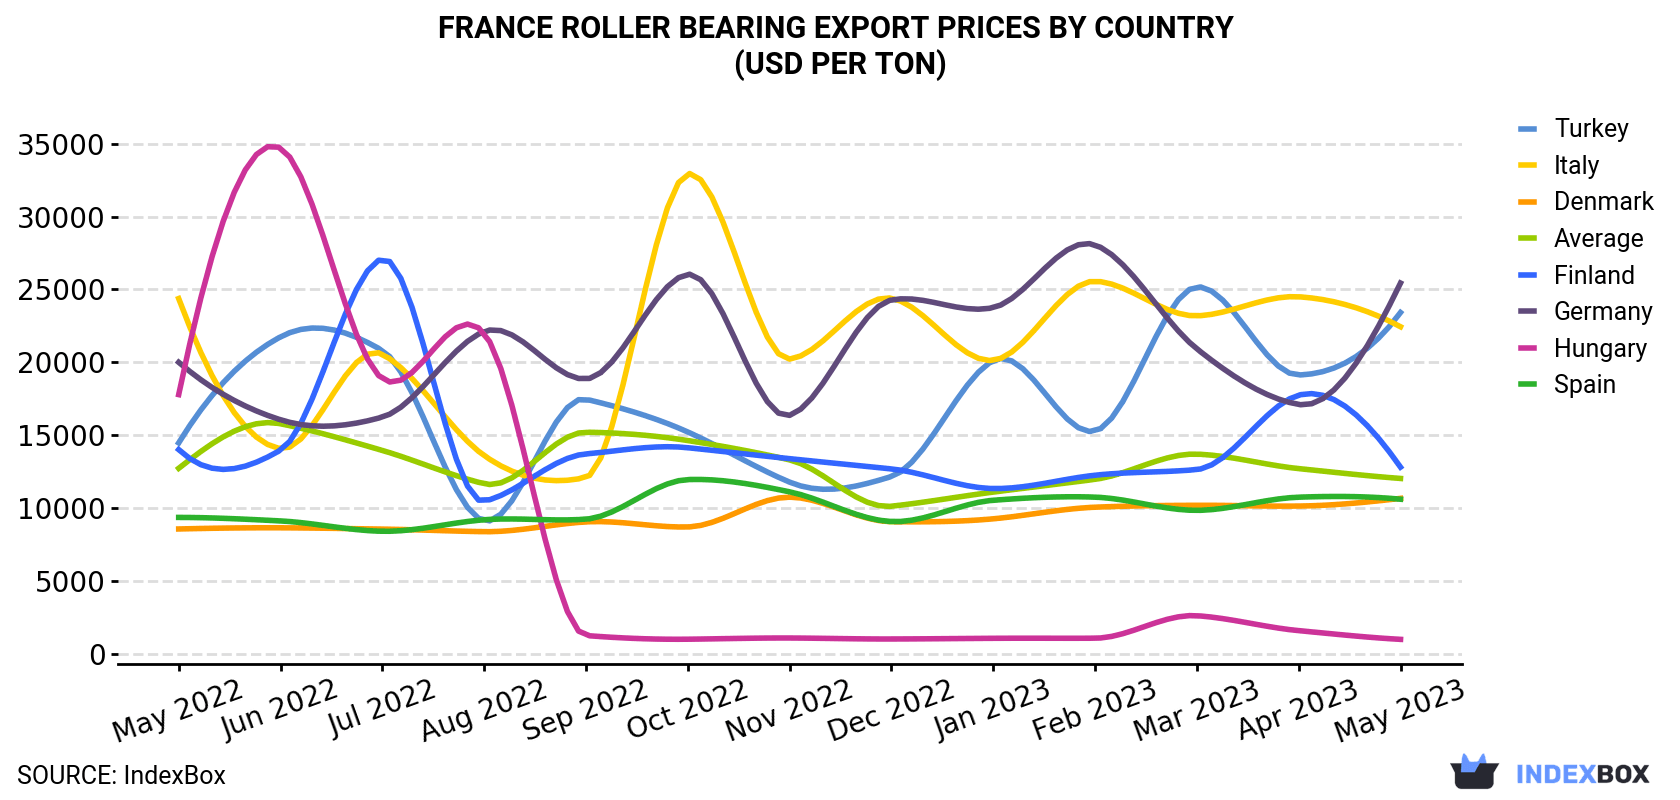 France Roller Bearing Export Prices By Country (USD Per Ton)